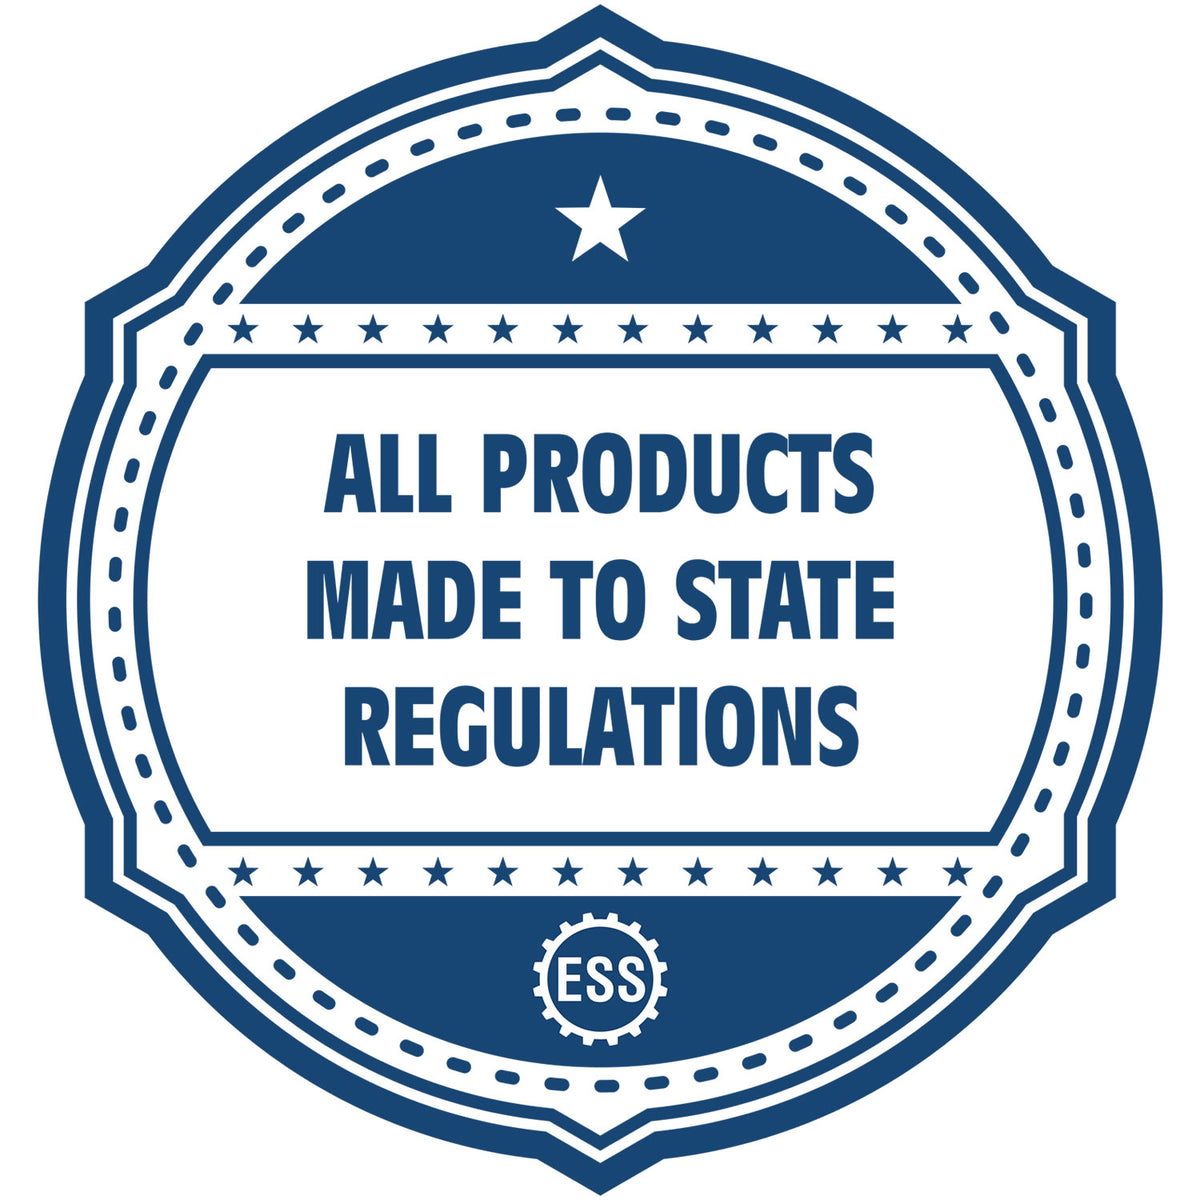 An icon or badge element for the Soft Pocket Arizona Landscape Architect Embosser showing that this product is made in compliance with state regulations.